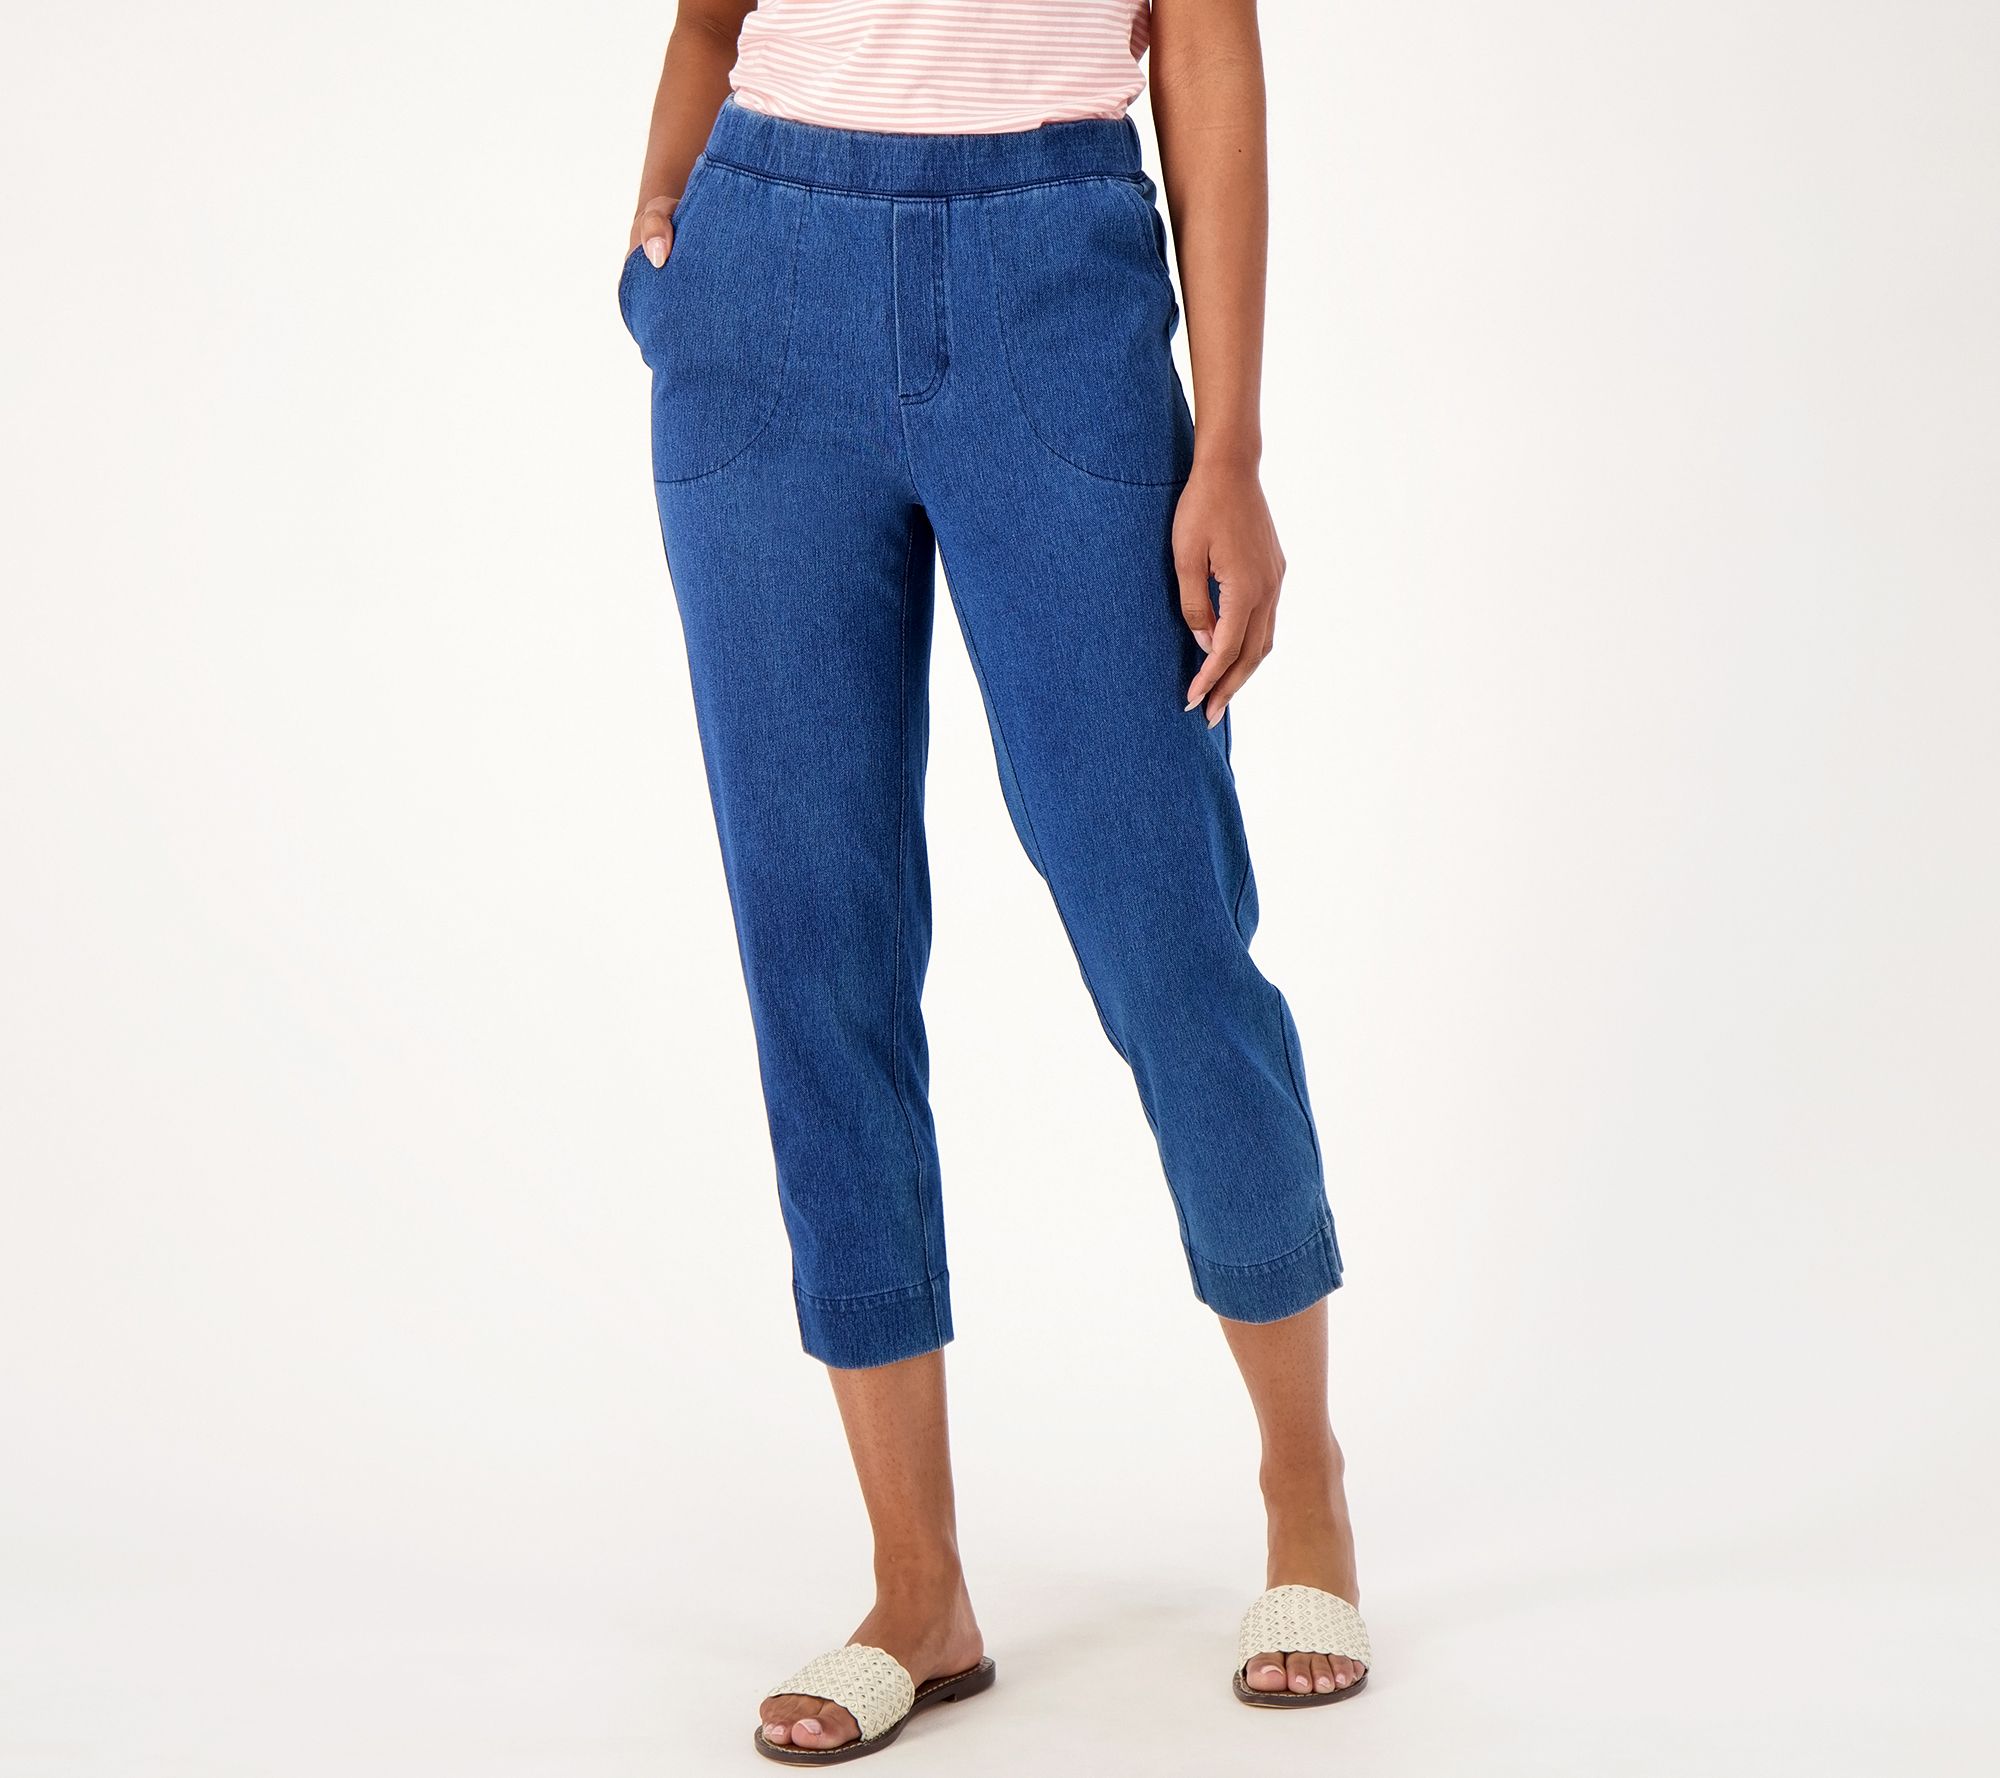 Denim & Co. Comfy Knit Air Tall Straight Crop Pant with Side Slits